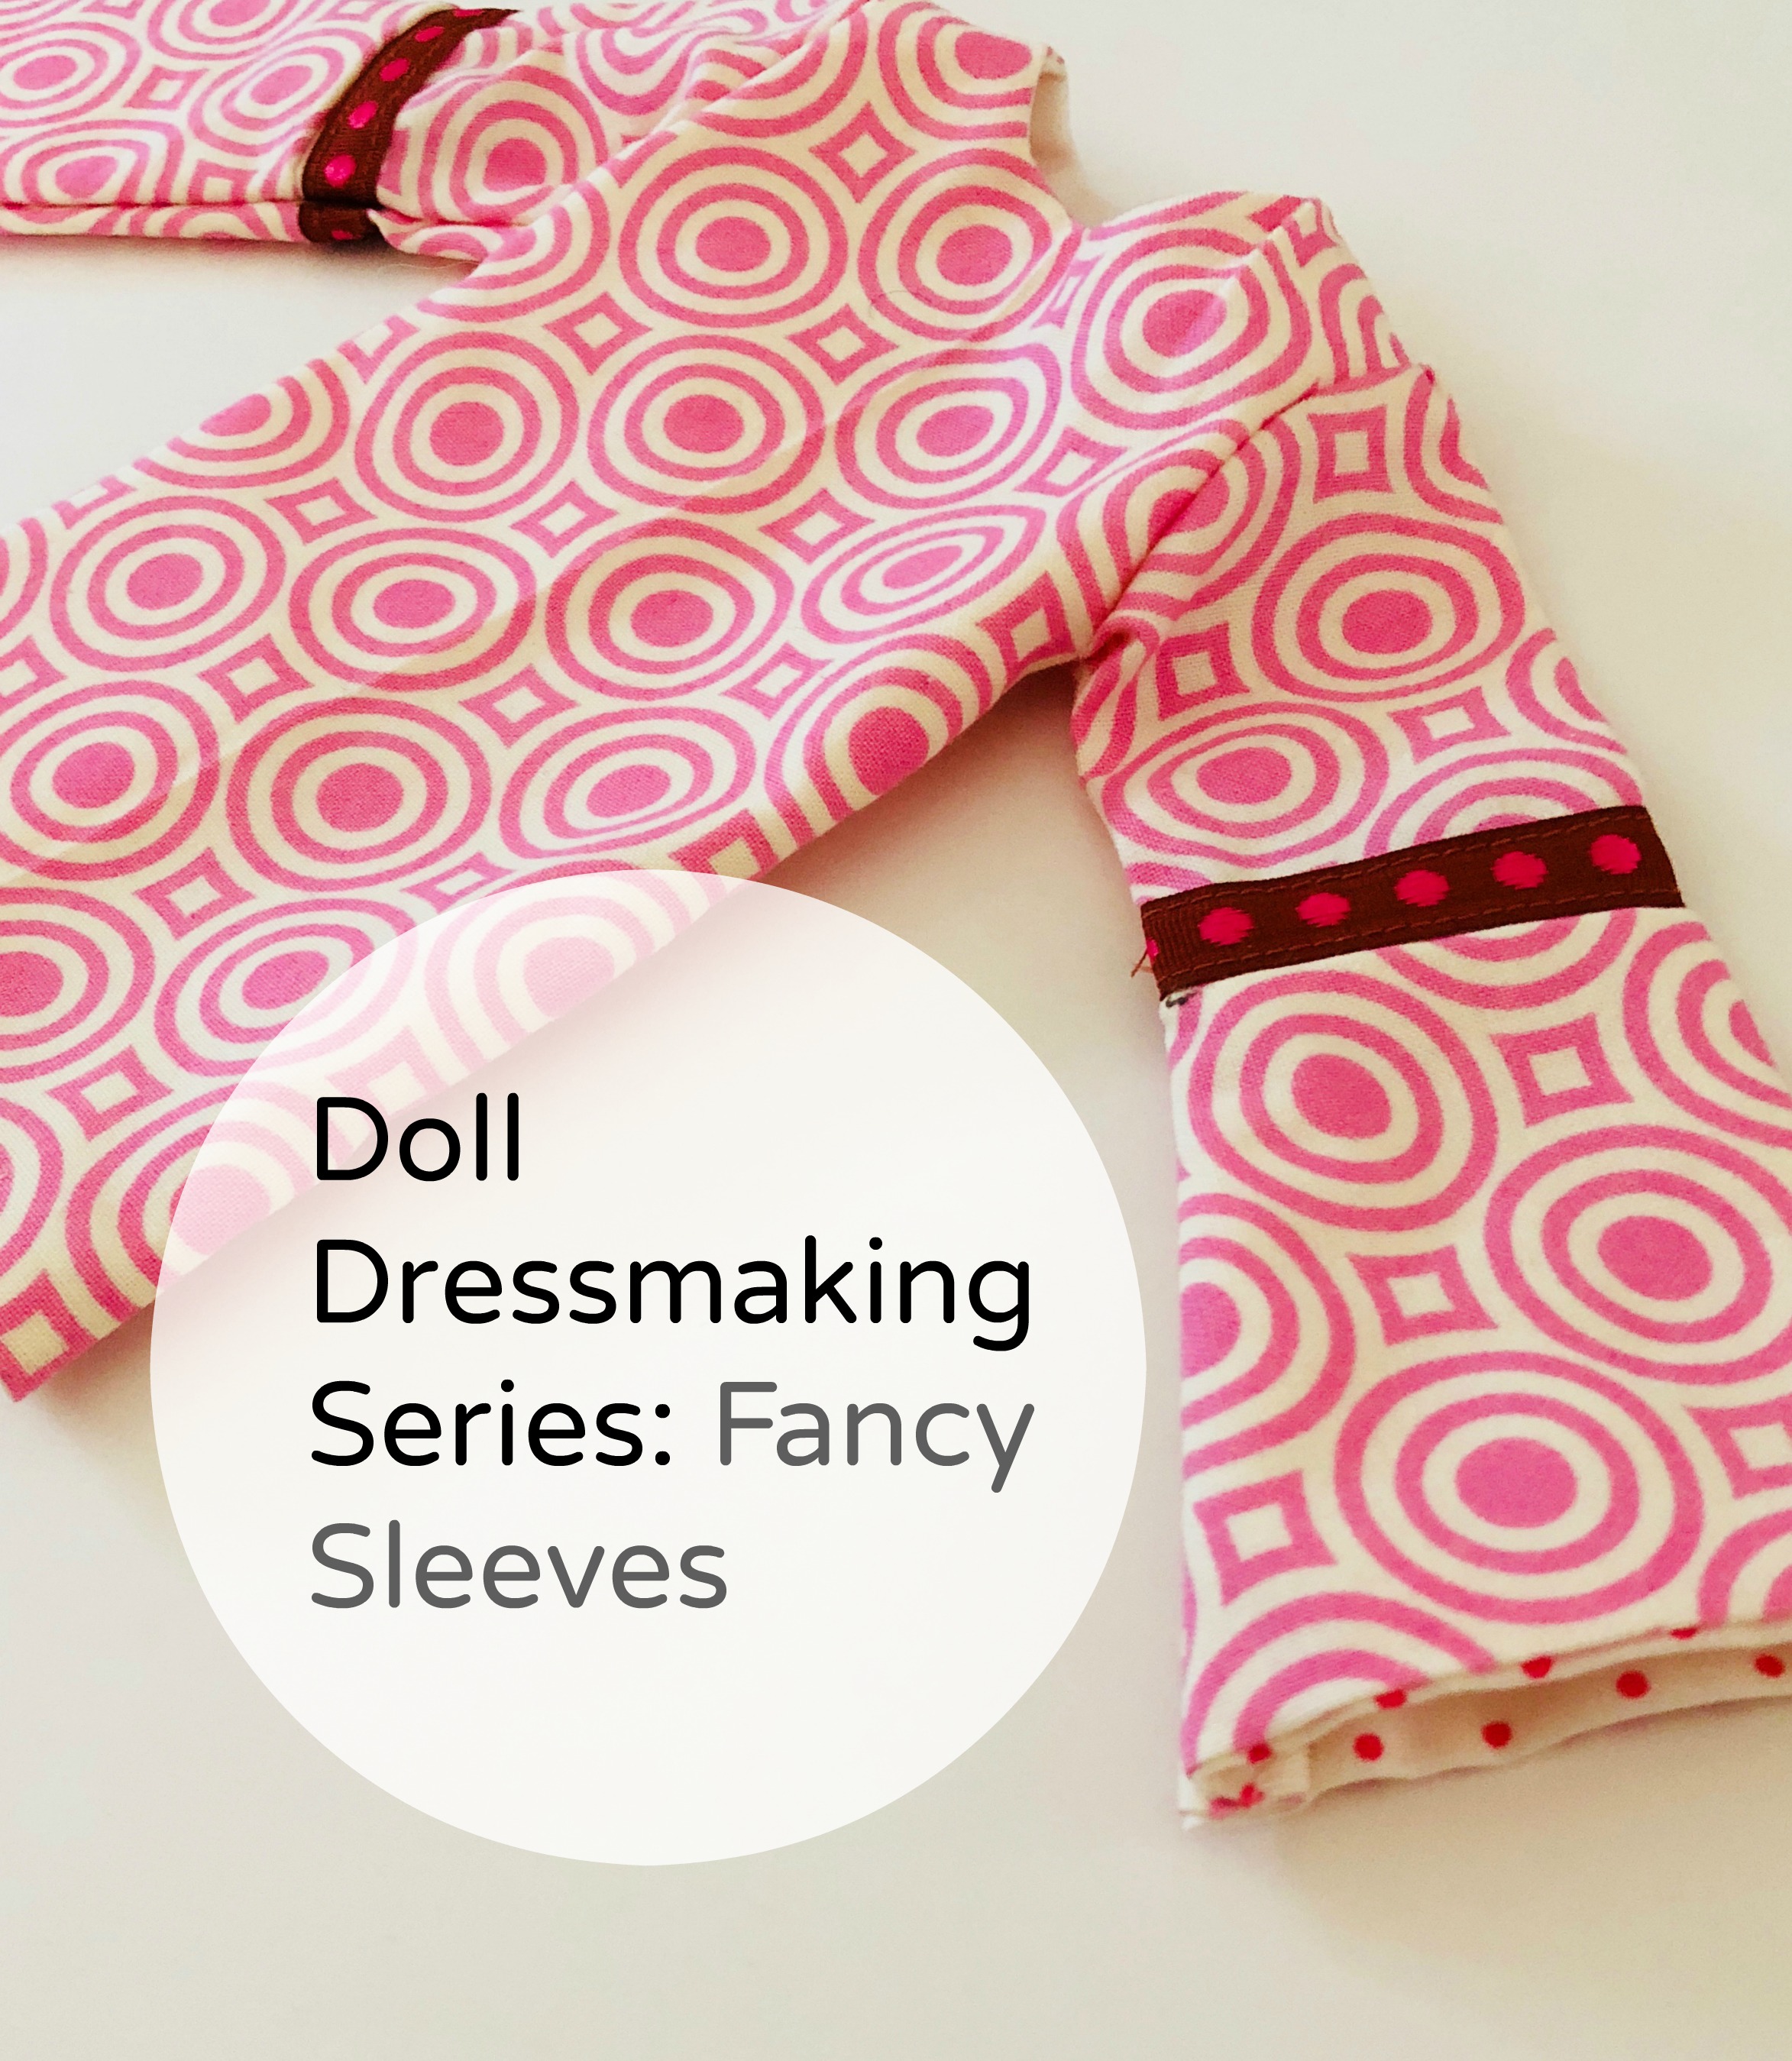 Doll Dressmaking Series: Making your own fabric trim — Phoebe&Egg